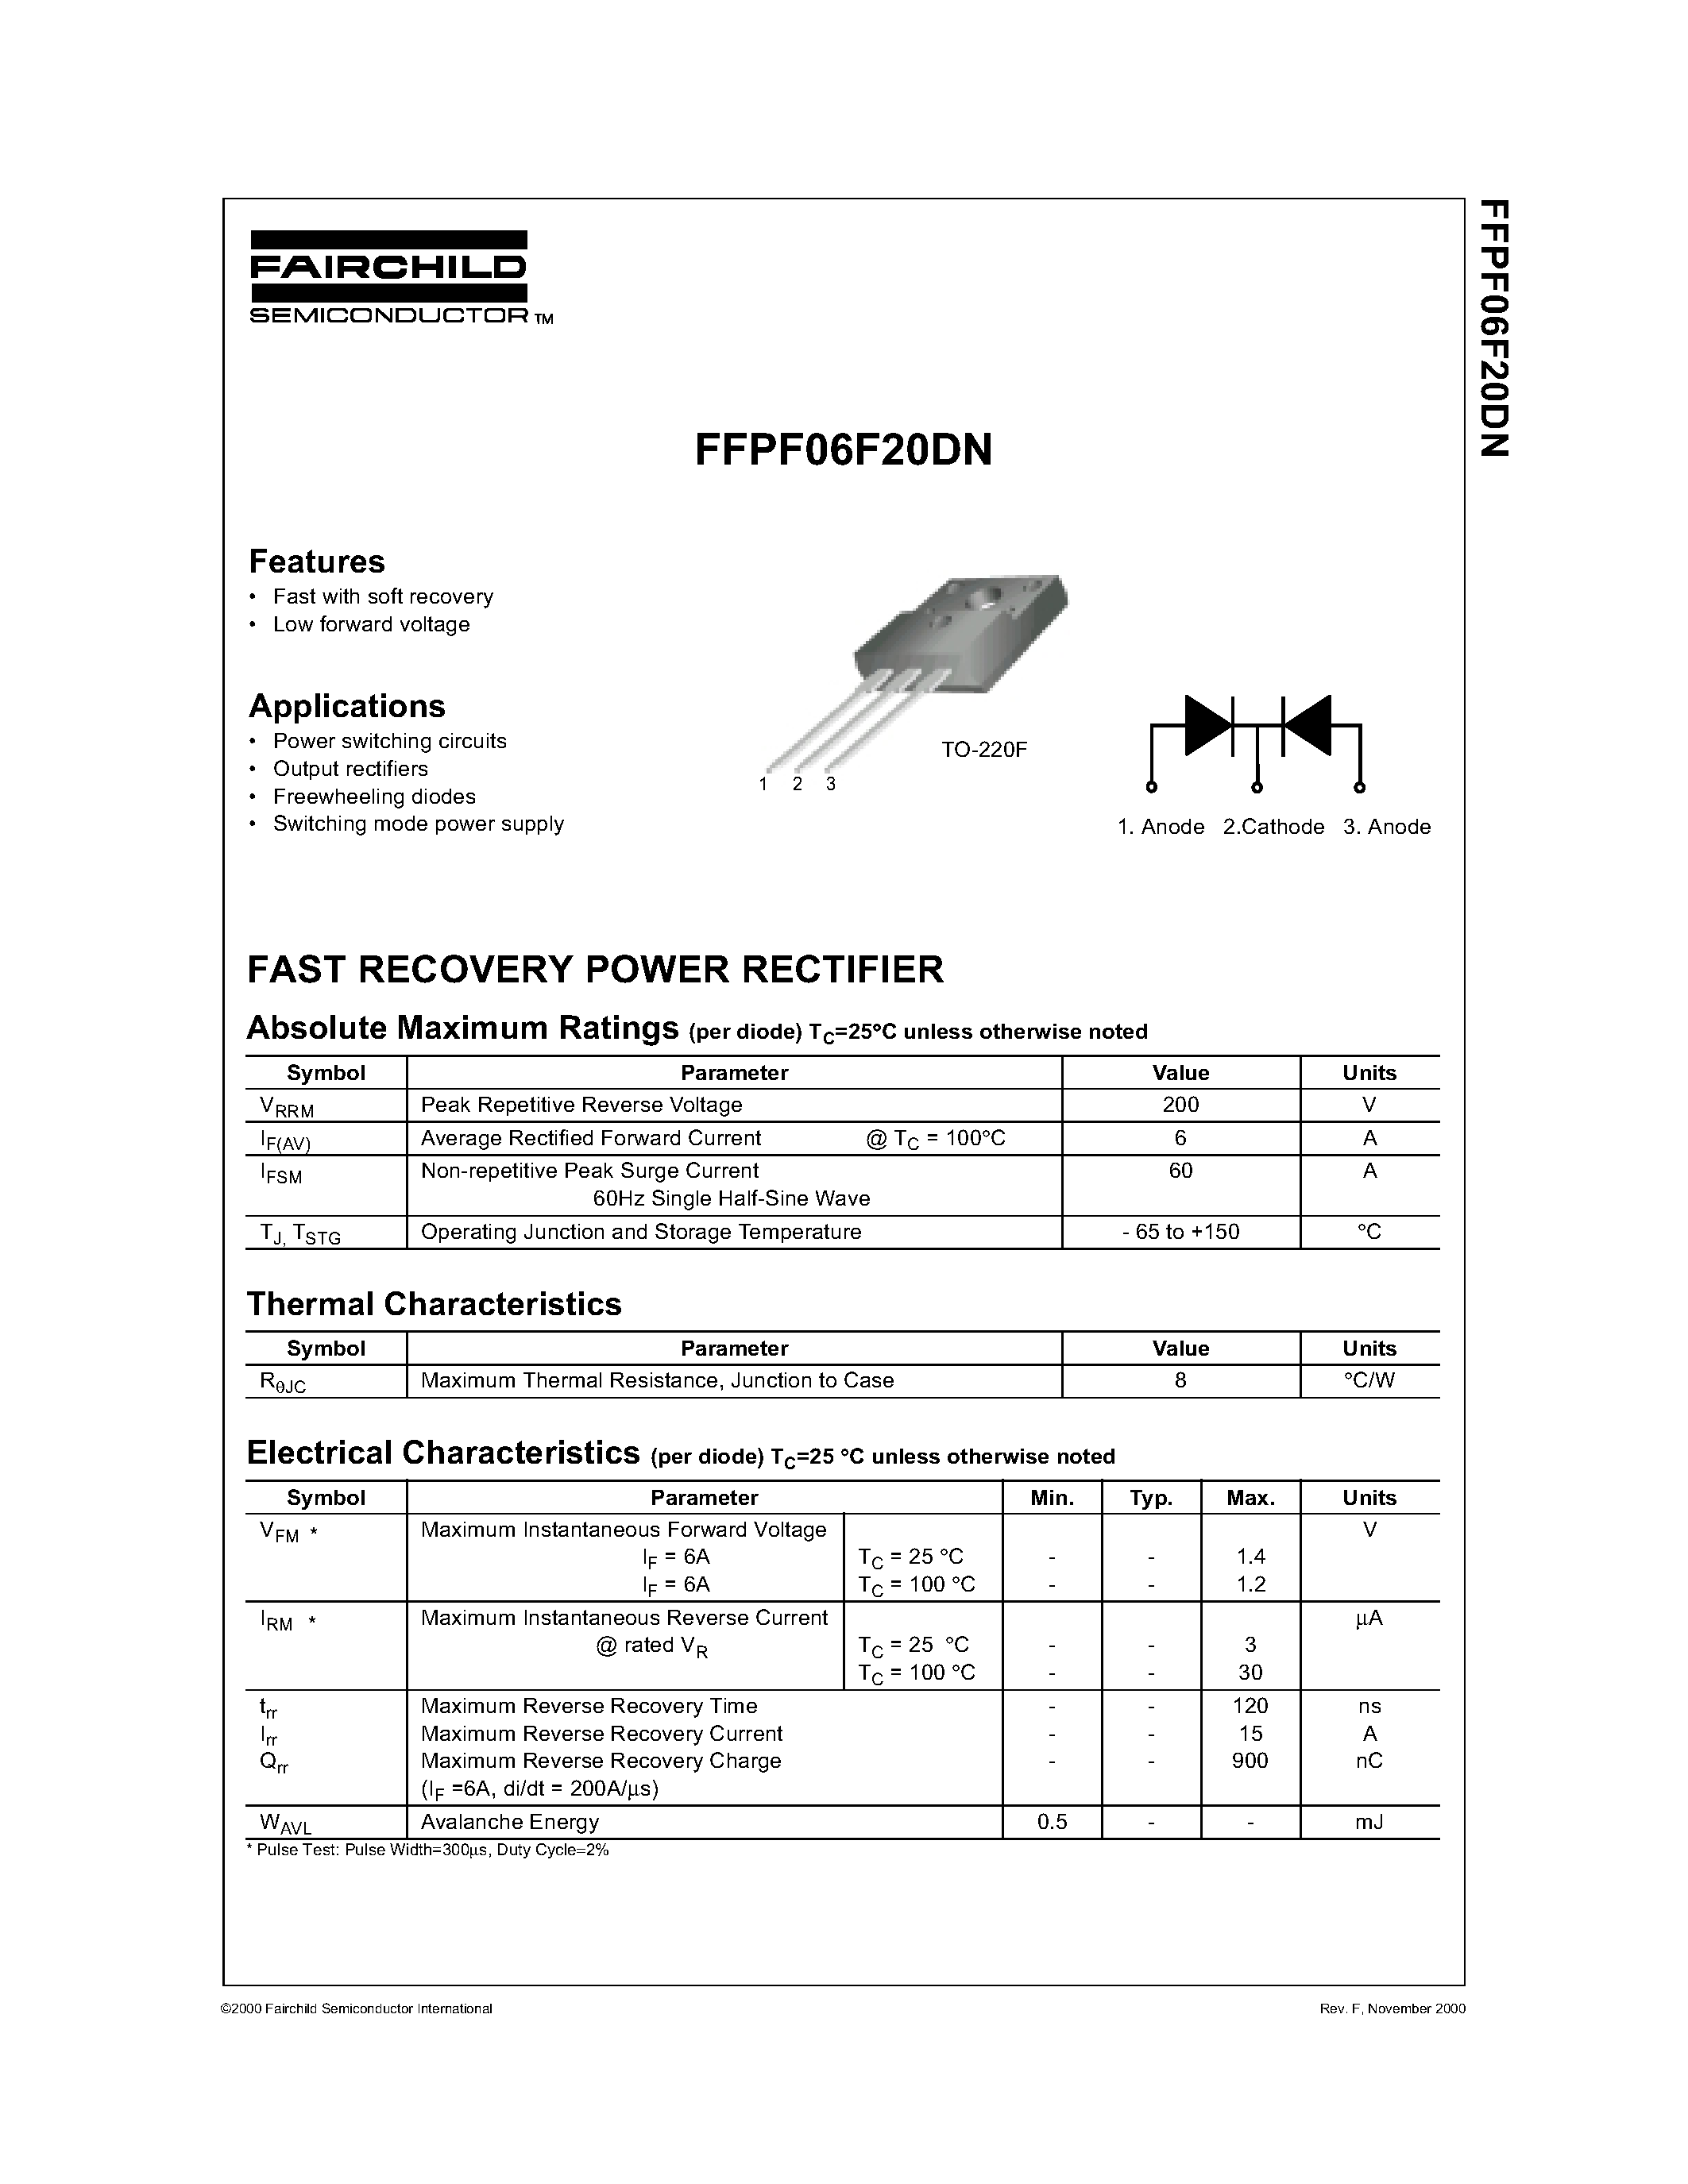 Datasheet FFPF06F20DN - FAST RECOVERY POWER RECTIFIER page 1